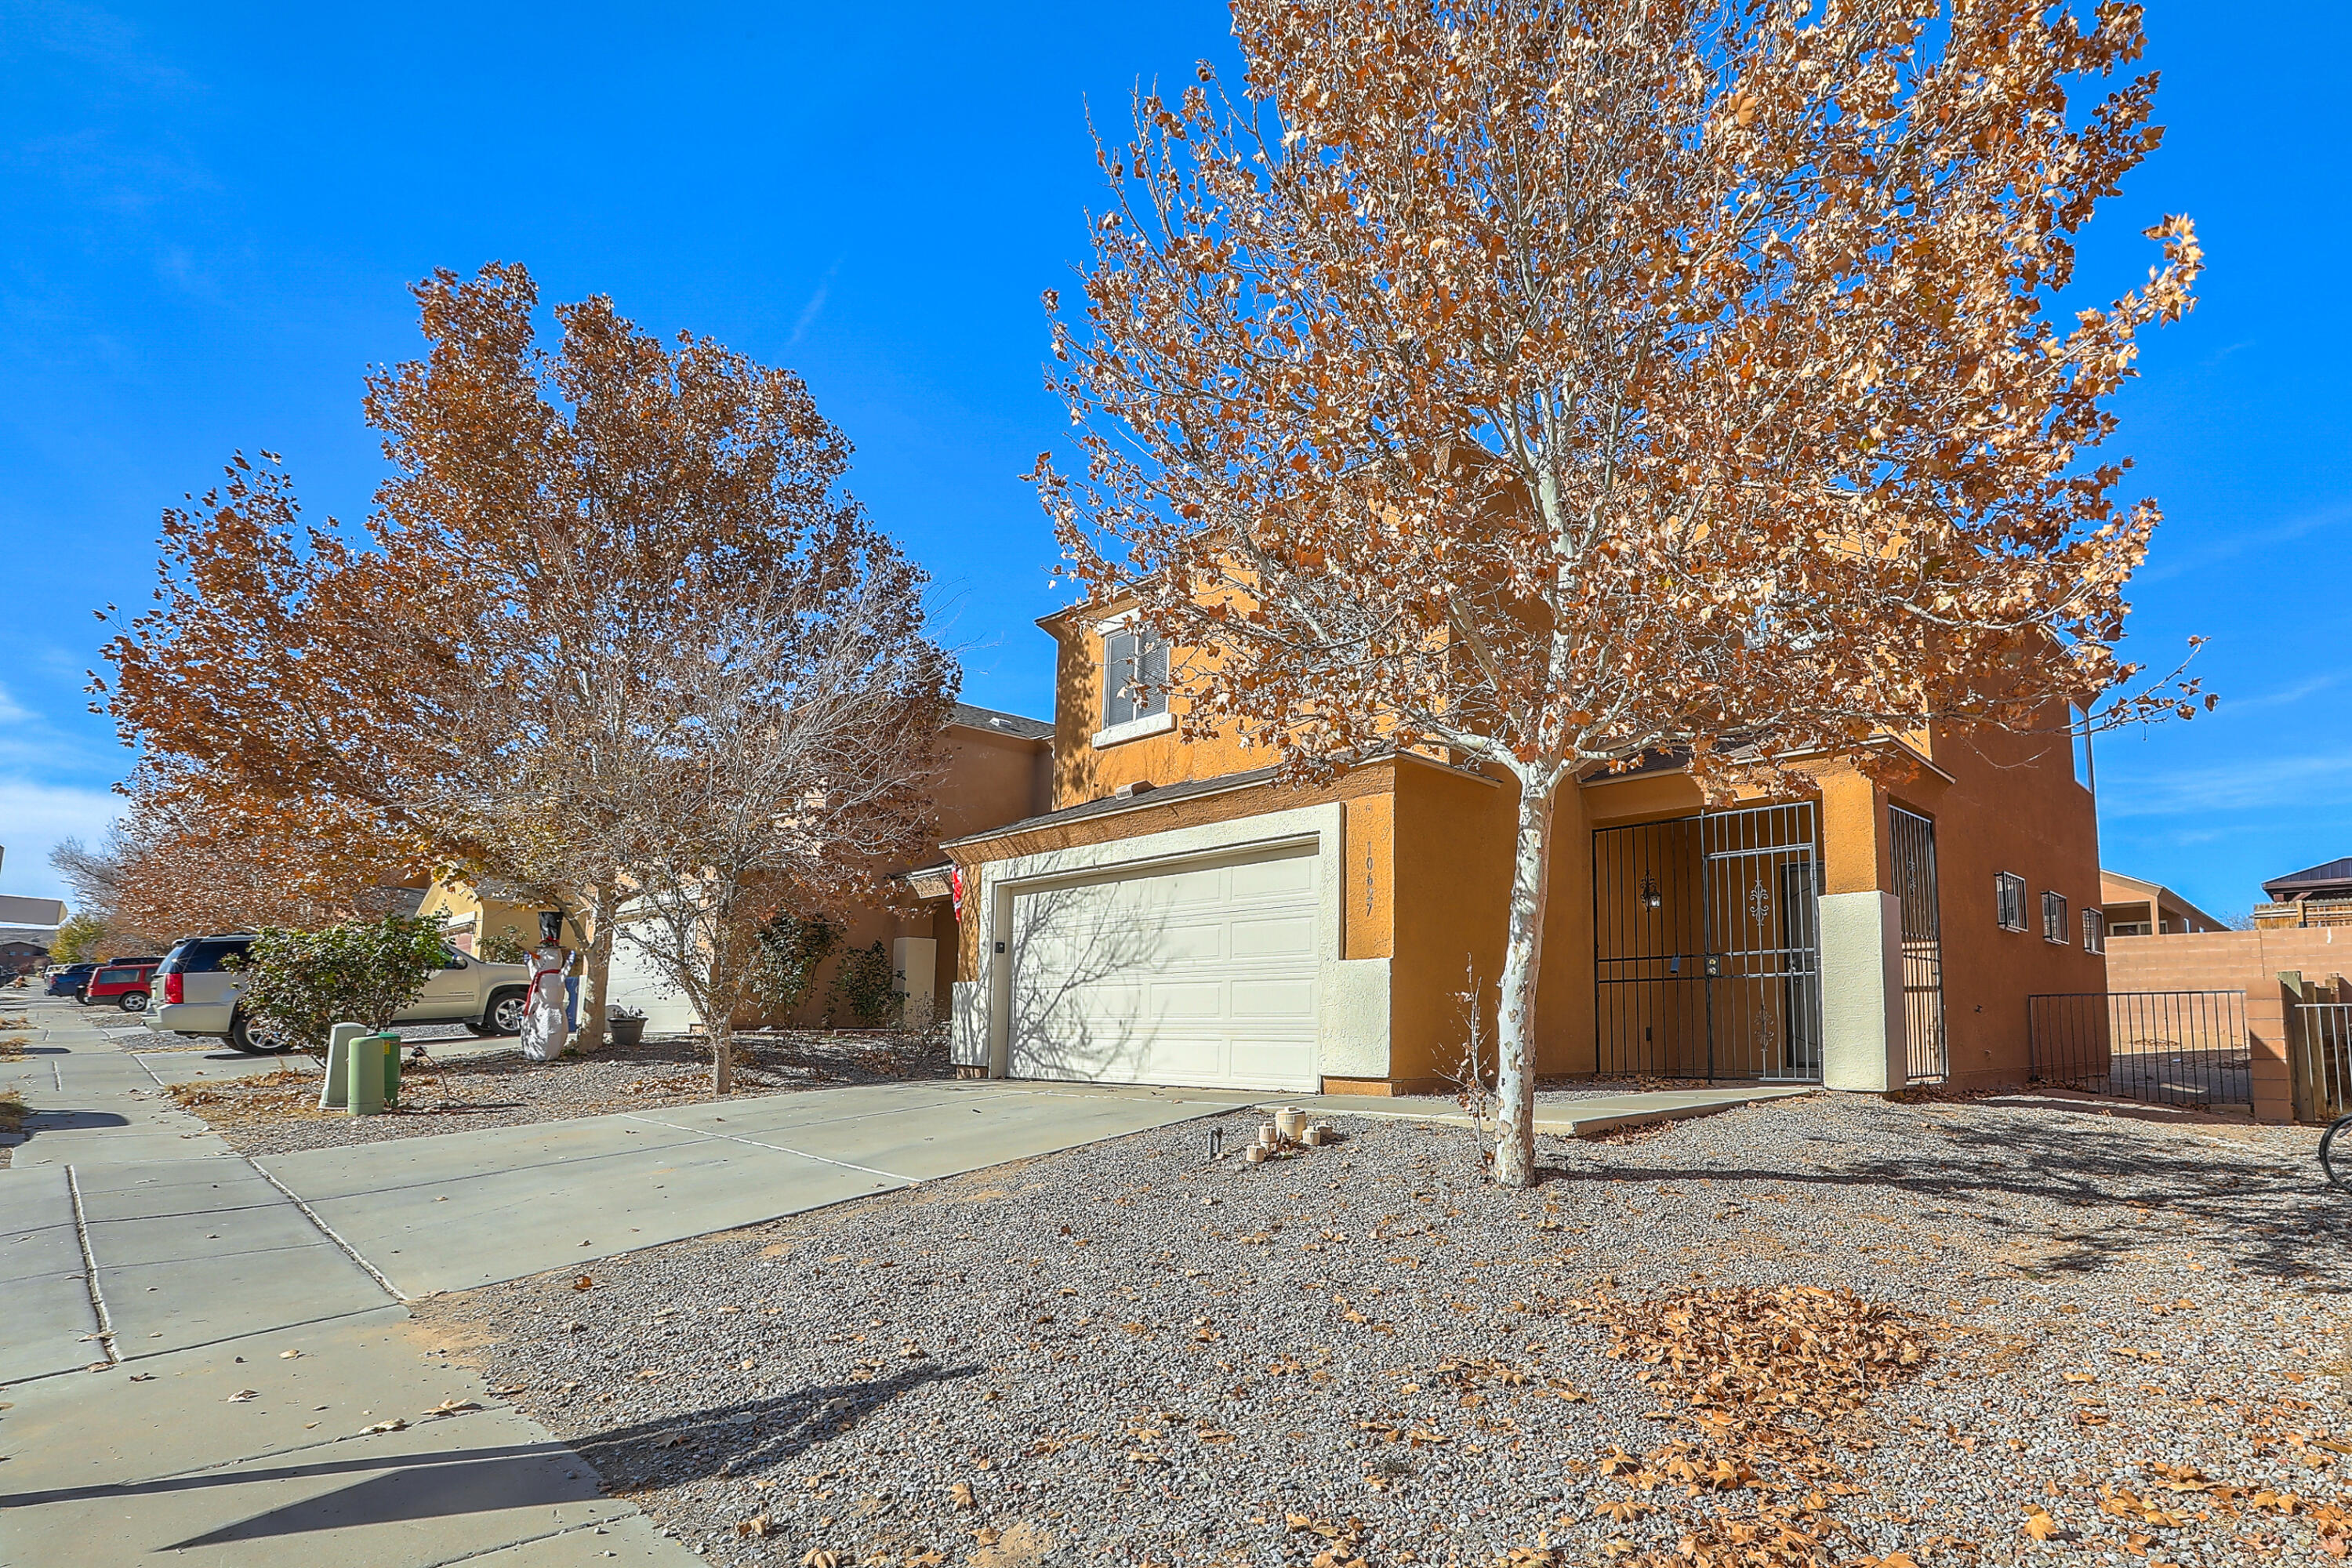 Move-in ready home in a great neighborhood. In addition to the new kitchen appliances, the washer and dryer are included as well.El Rancho Grande Park is within walking distance. Shopping and entertainment centers are minutes away. I40 is easily accessible.